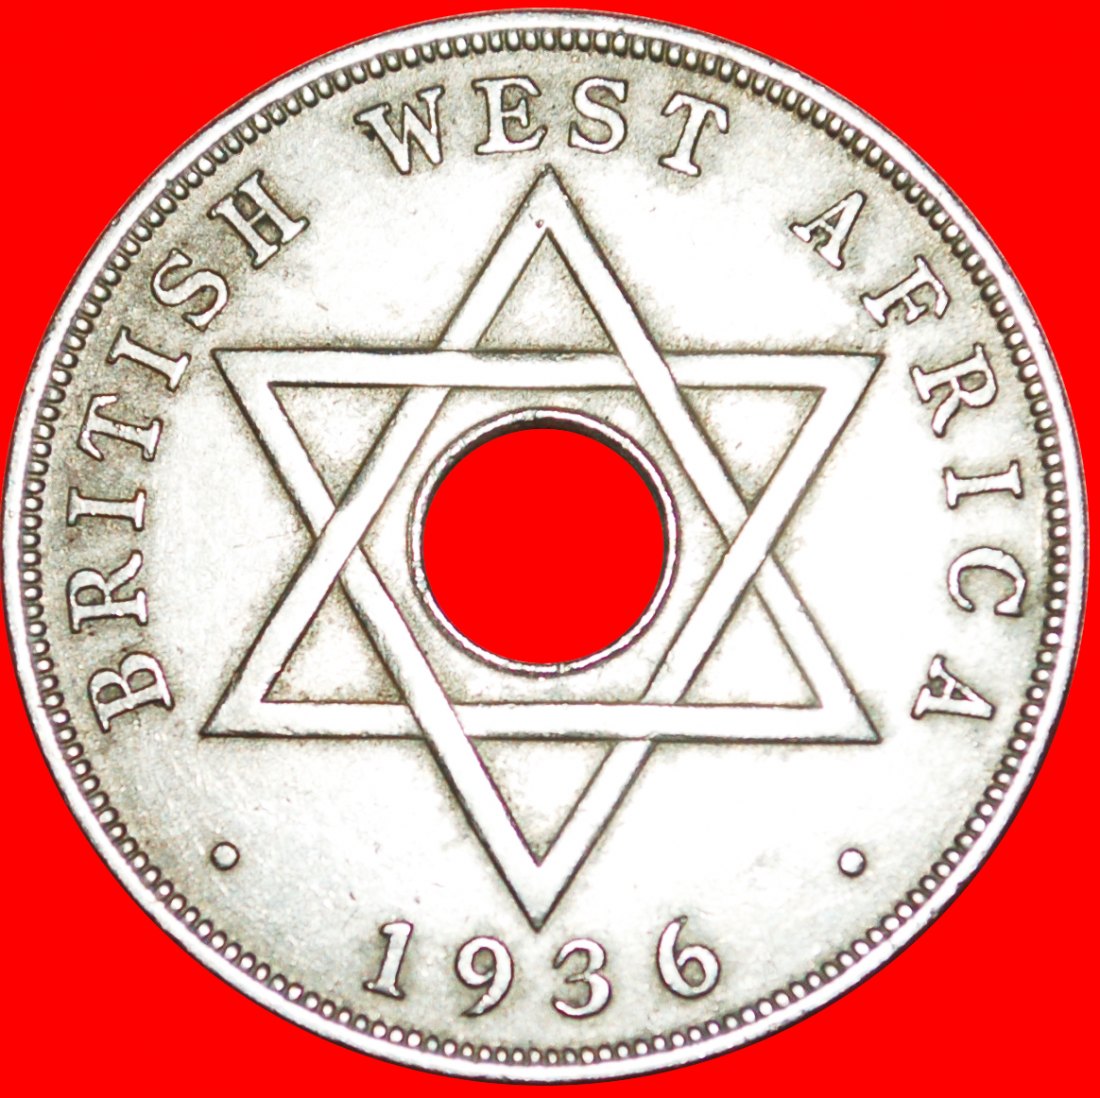  * GREAT BRITAIN STAR OF DAVID:BRITISH WEST AFRICA★1 PENNY 1936 ★LOW START ★ NO RESERVE!   